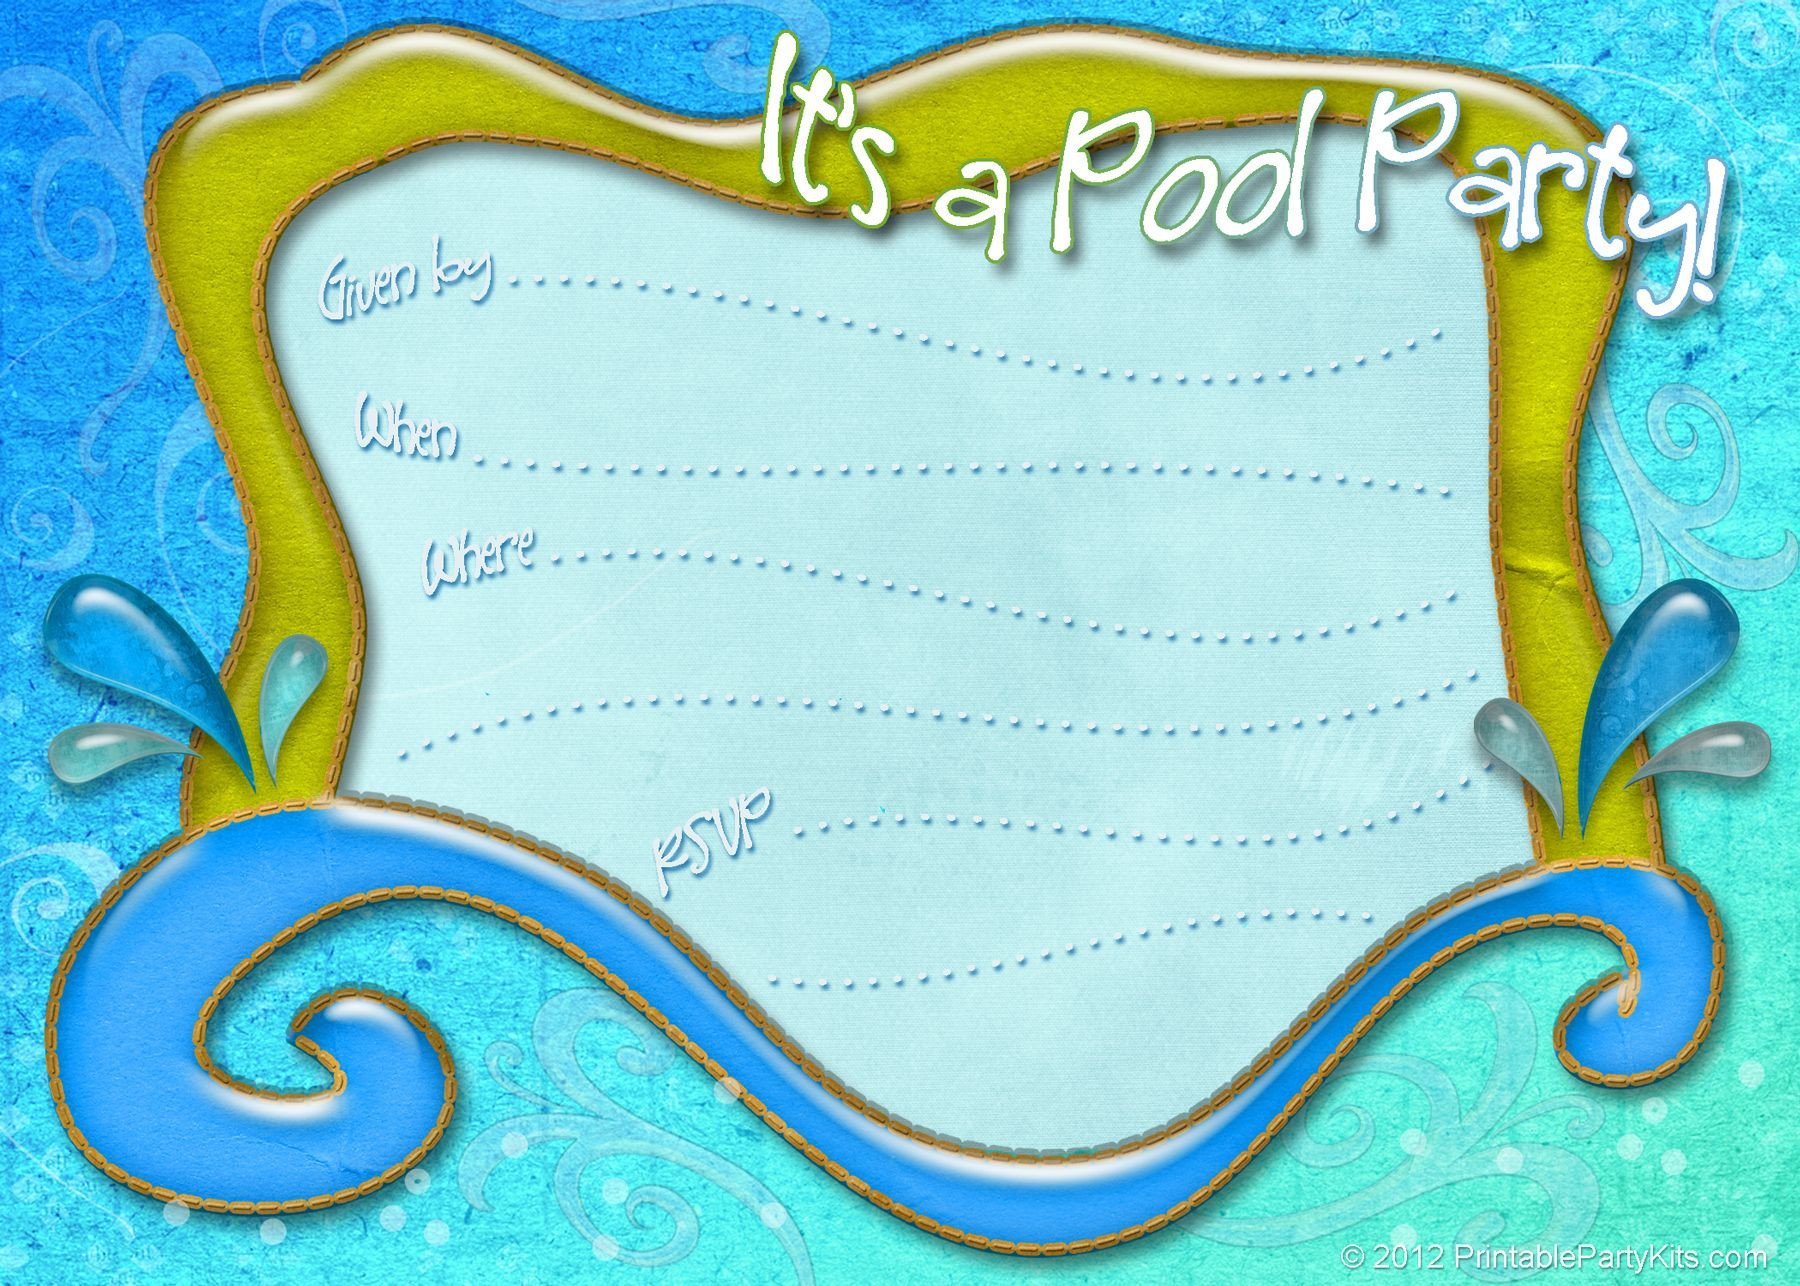 Free printable pool party invitation template from